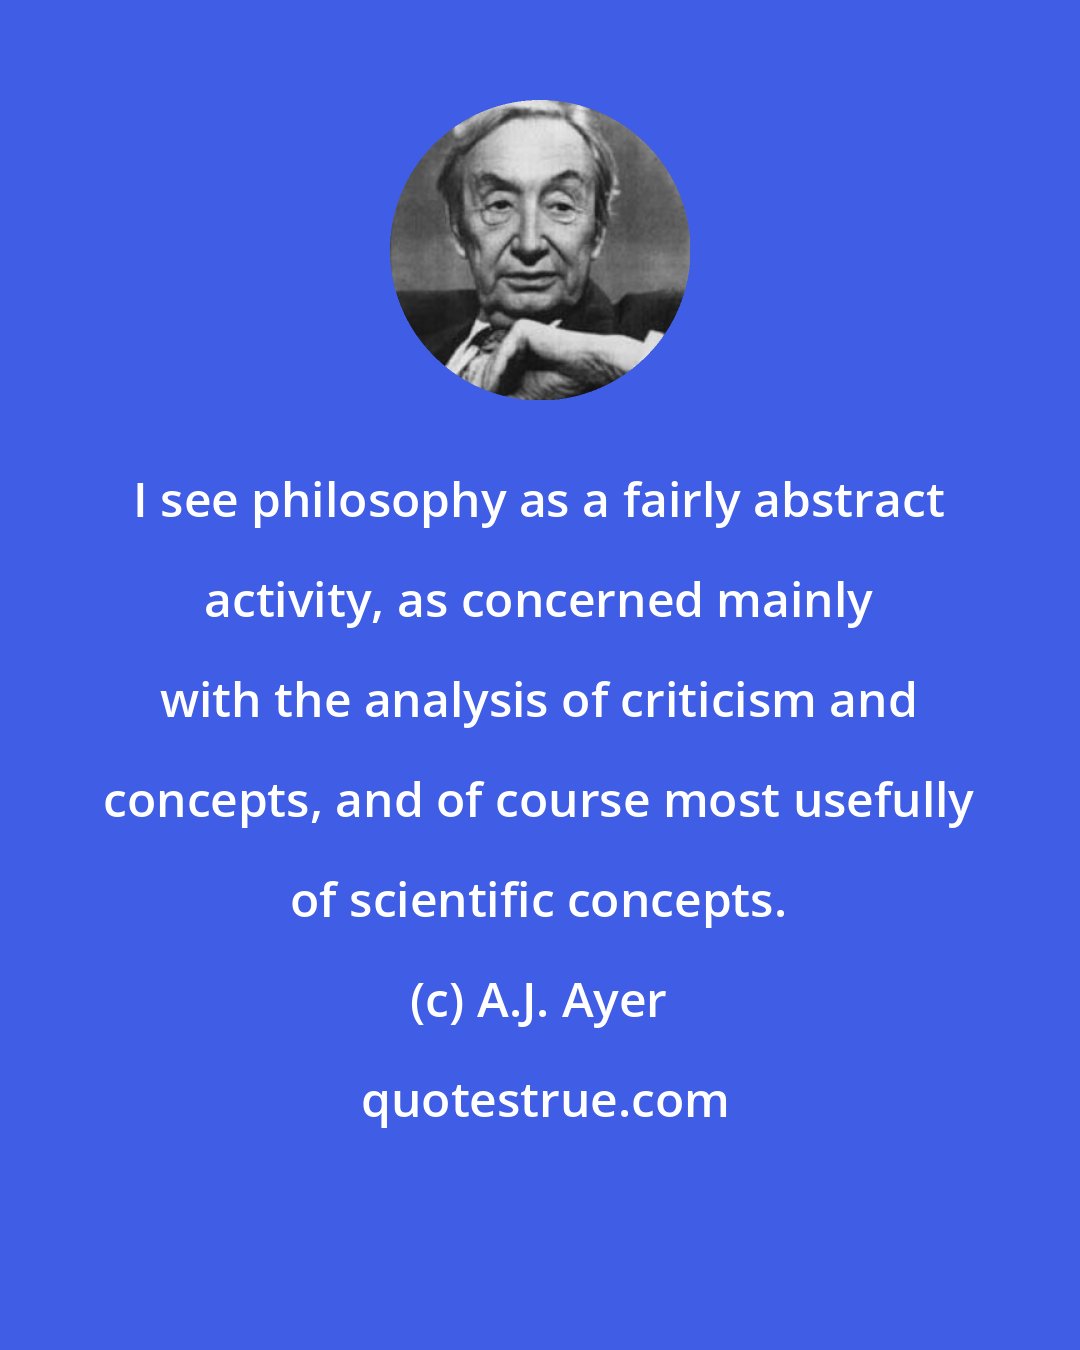 A.J. Ayer: I see philosophy as a fairly abstract activity, as concerned mainly with the analysis of criticism and concepts, and of course most usefully of scientific concepts.